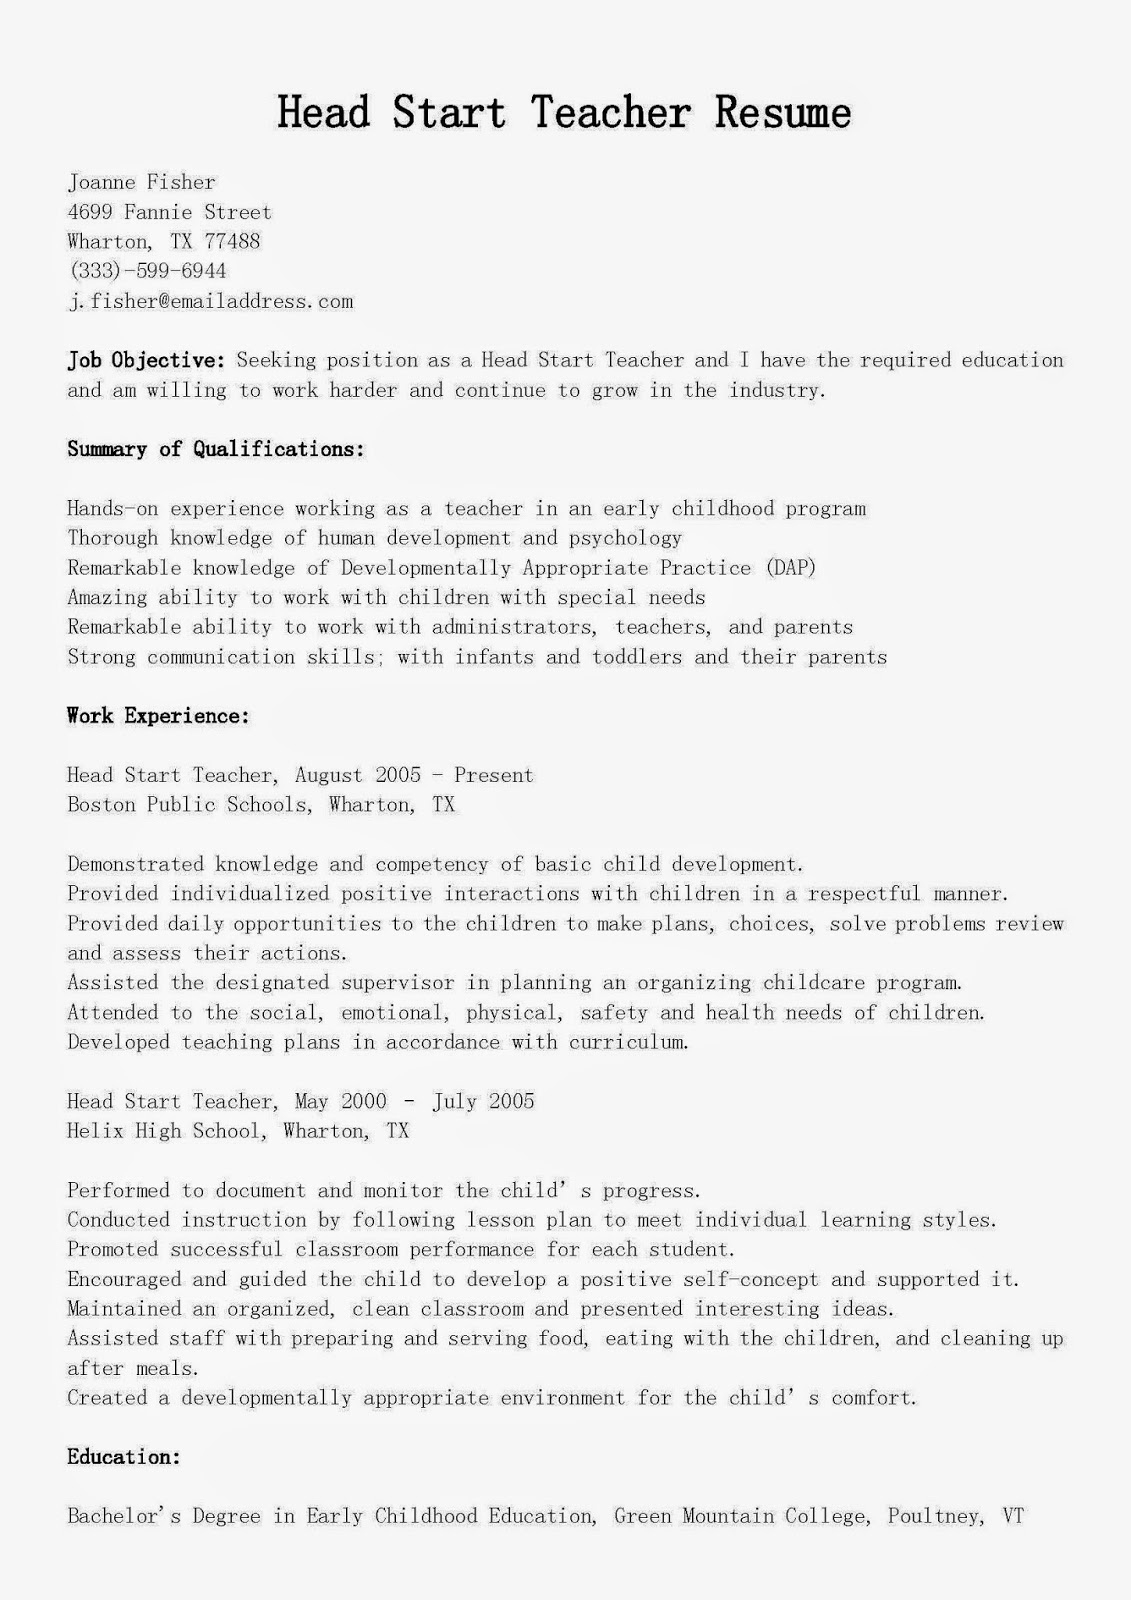 Cover Letter Template for Medical assistant - Resume Objective for Medical assistant Student the Best Way to Write